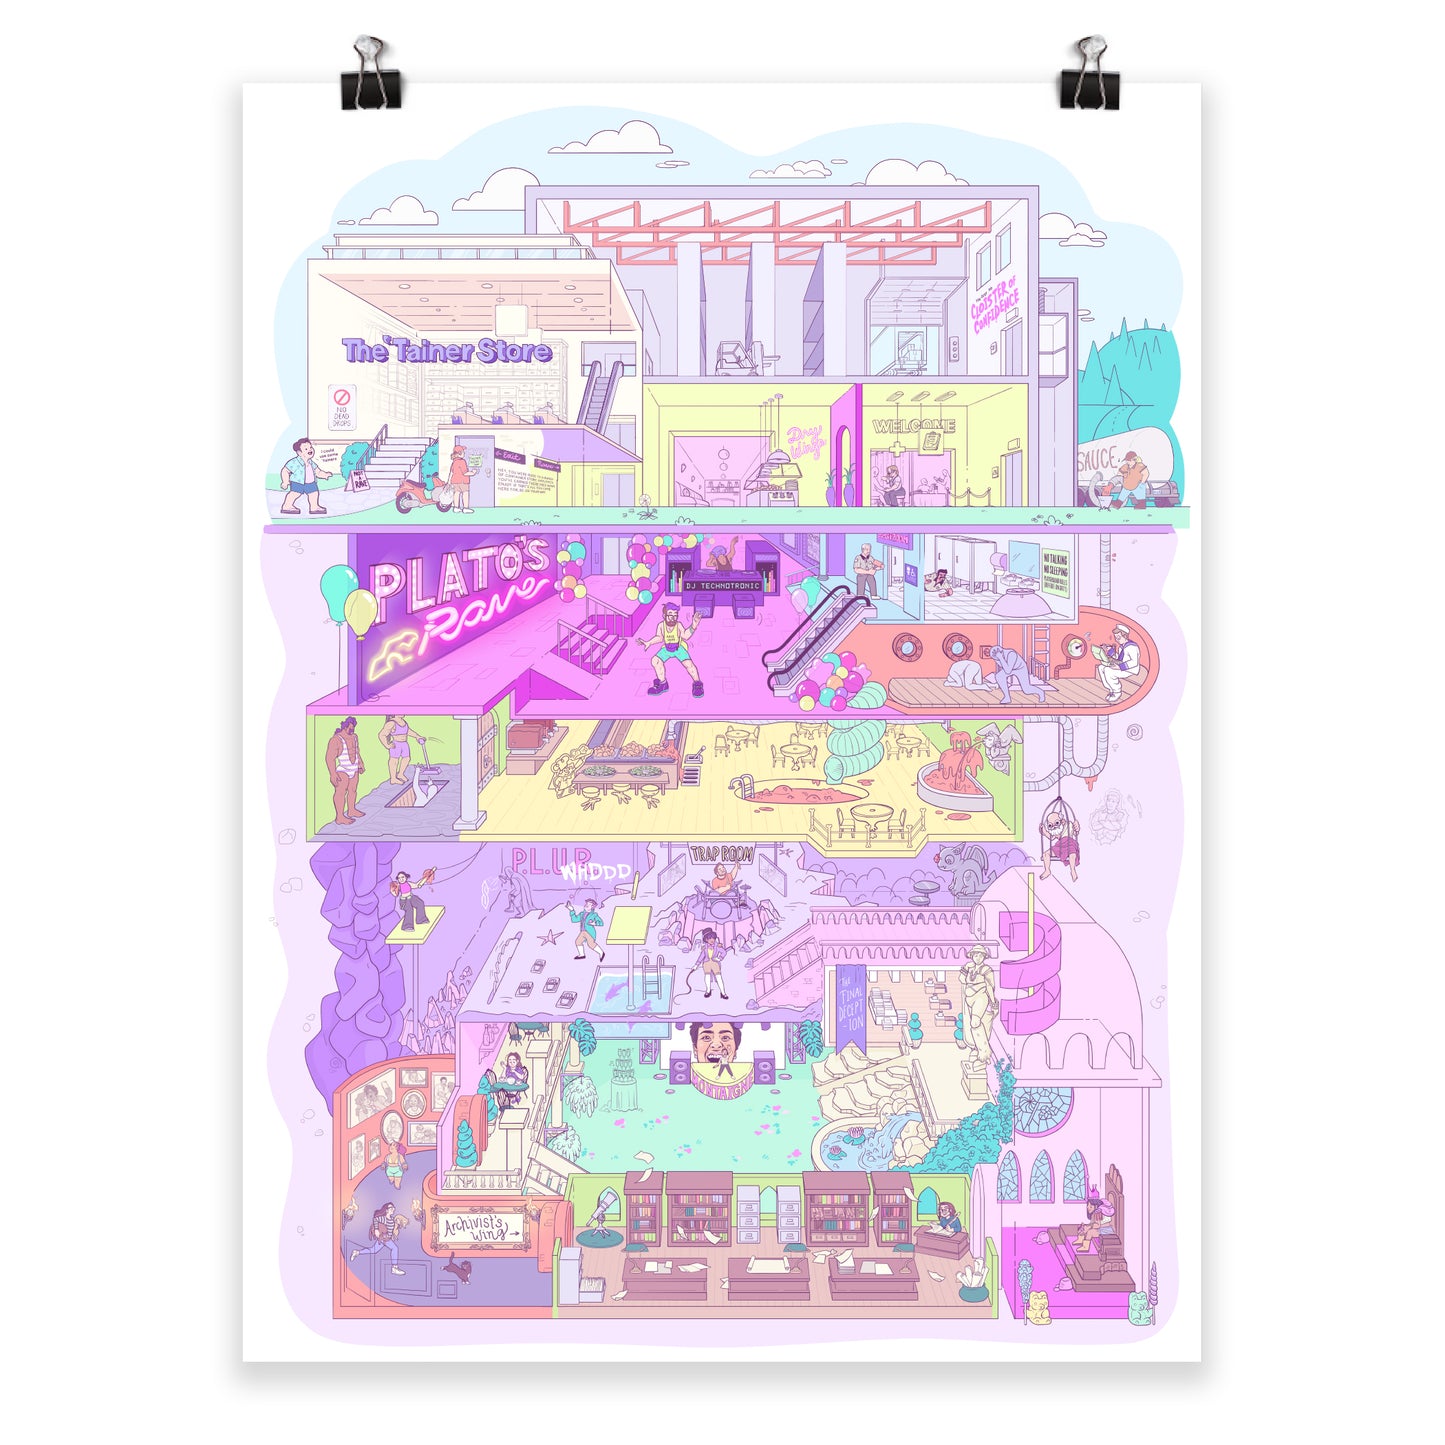 A poster of an illustration of Plato’s Rave. There are 6 main levels, with many smaller offshoots, alcoves, and rooms. The first three levels are above ground, the rest are below. The colors are pastel and soft neons, and there are myriad visual references to the McElroy Family podcasts. Three inset images show closeup details of Justin about to enter the store, Travis dancing, and Griffin in his sailor suit.